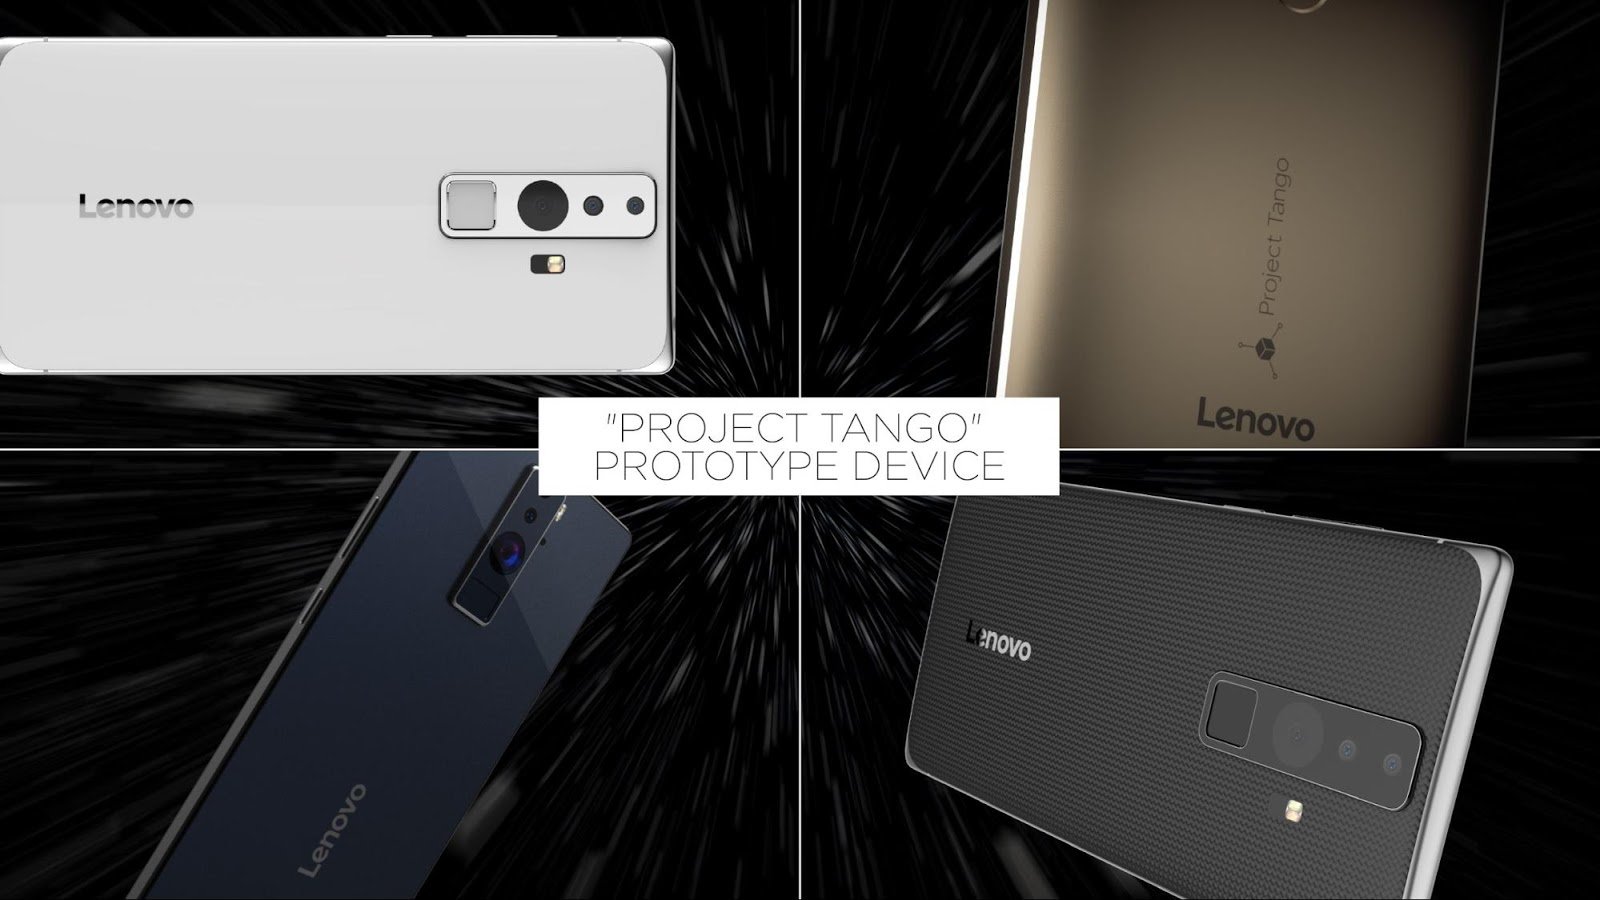 Google and Lenovo team up to create first consumer Project Tango smartphone